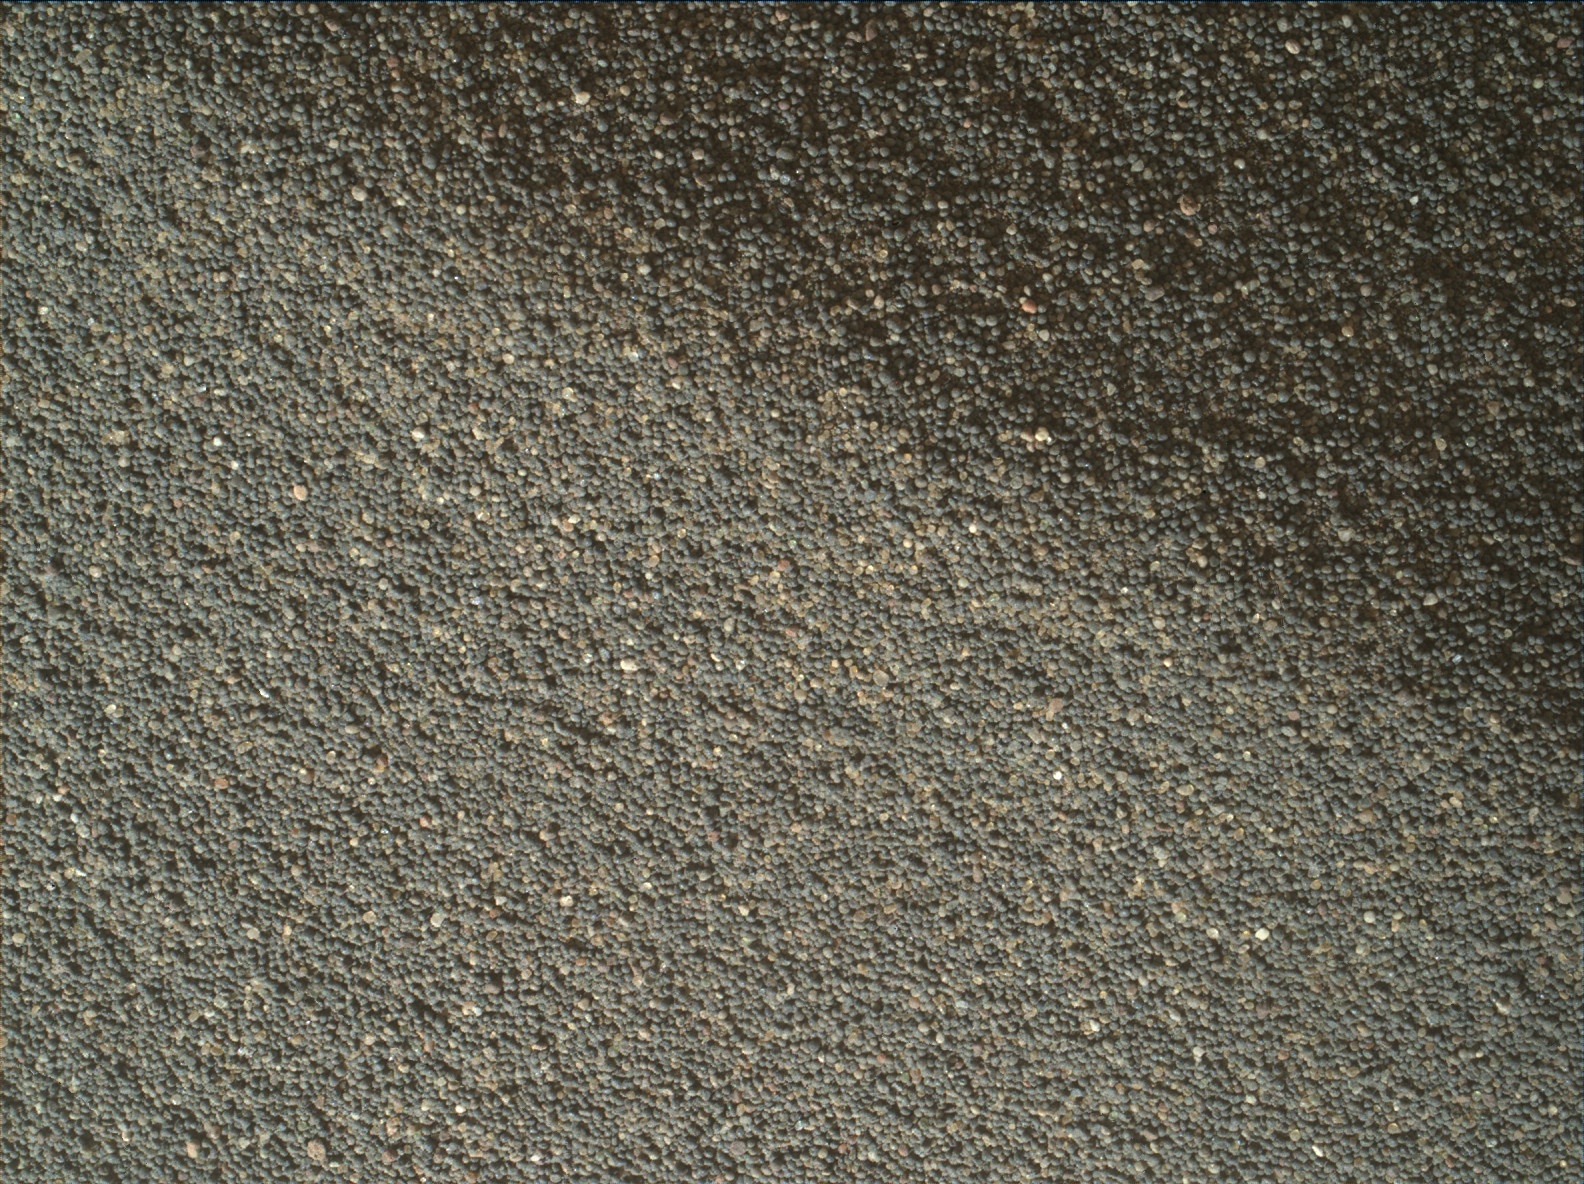 Nasa's Mars rover Curiosity acquired this image using its Mars Hand Lens Imager (MAHLI) on Sol 3079